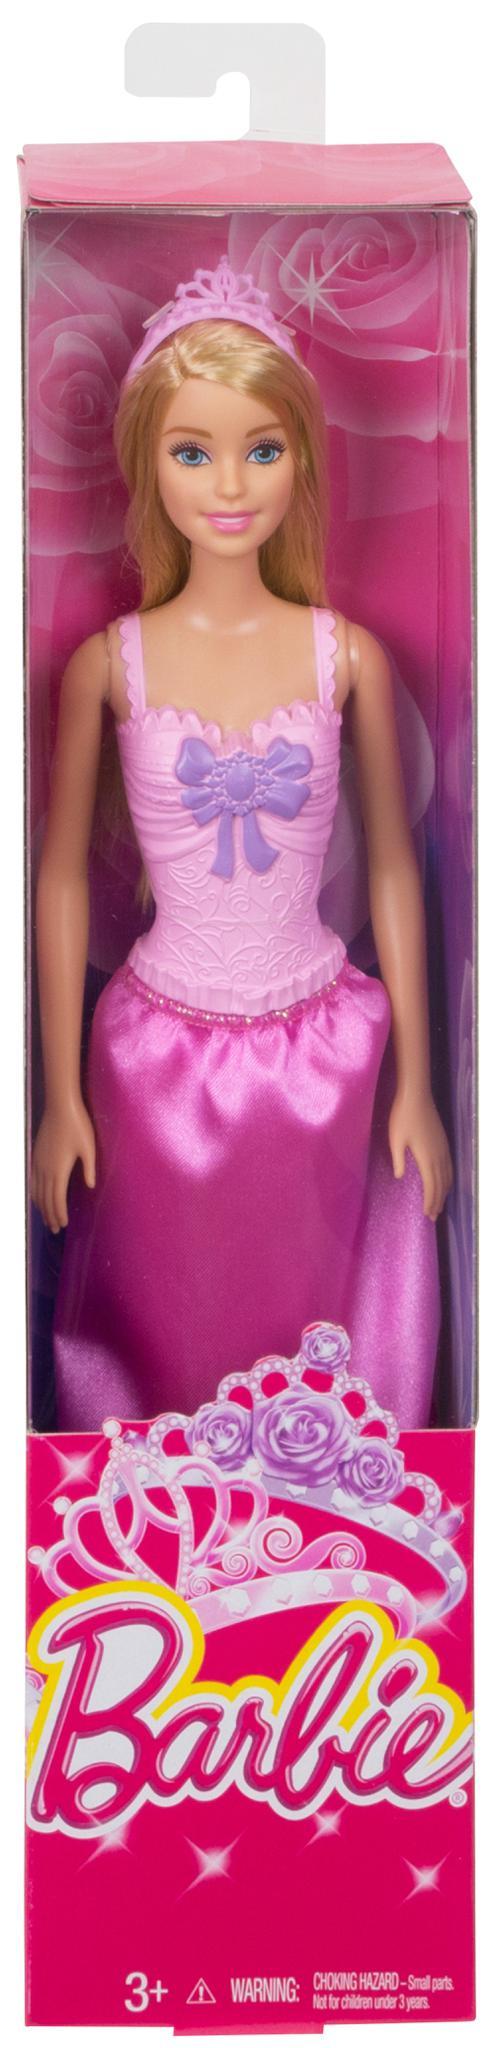 Barbie Fairytale Princess Doll with Pink Tiara & Gown